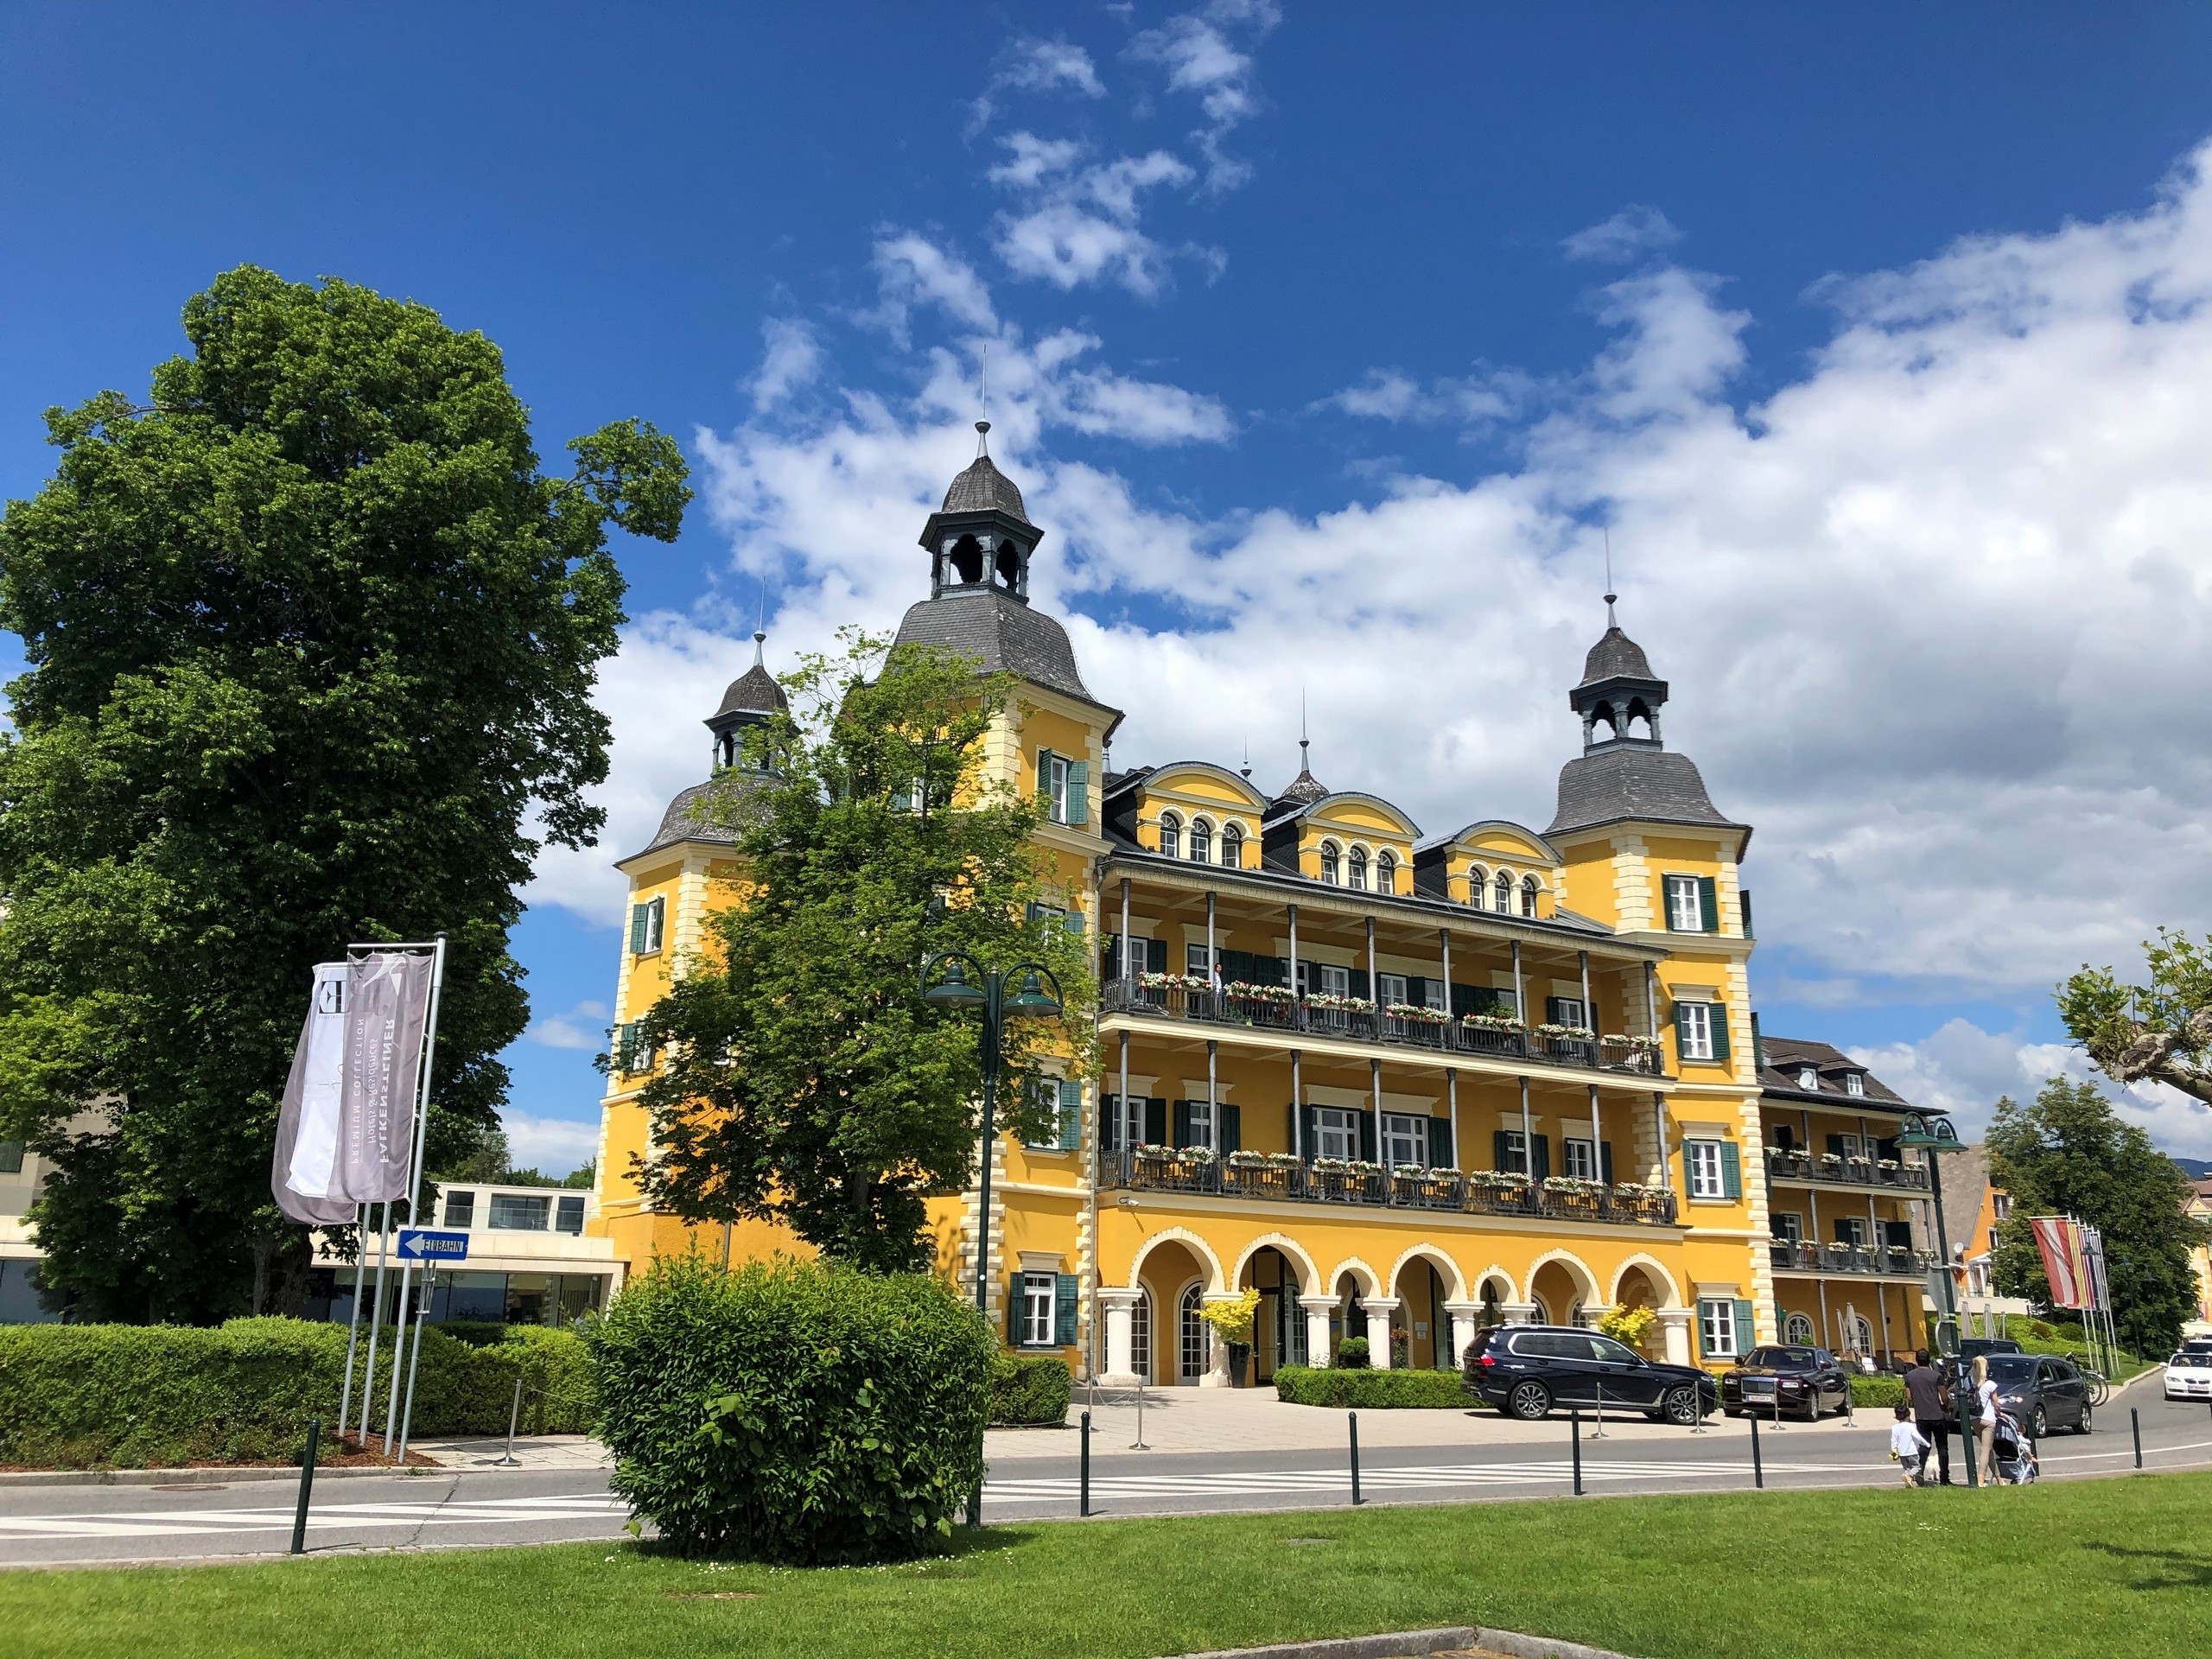 Beautiful architecture seen in Velden while on a self-guided trip